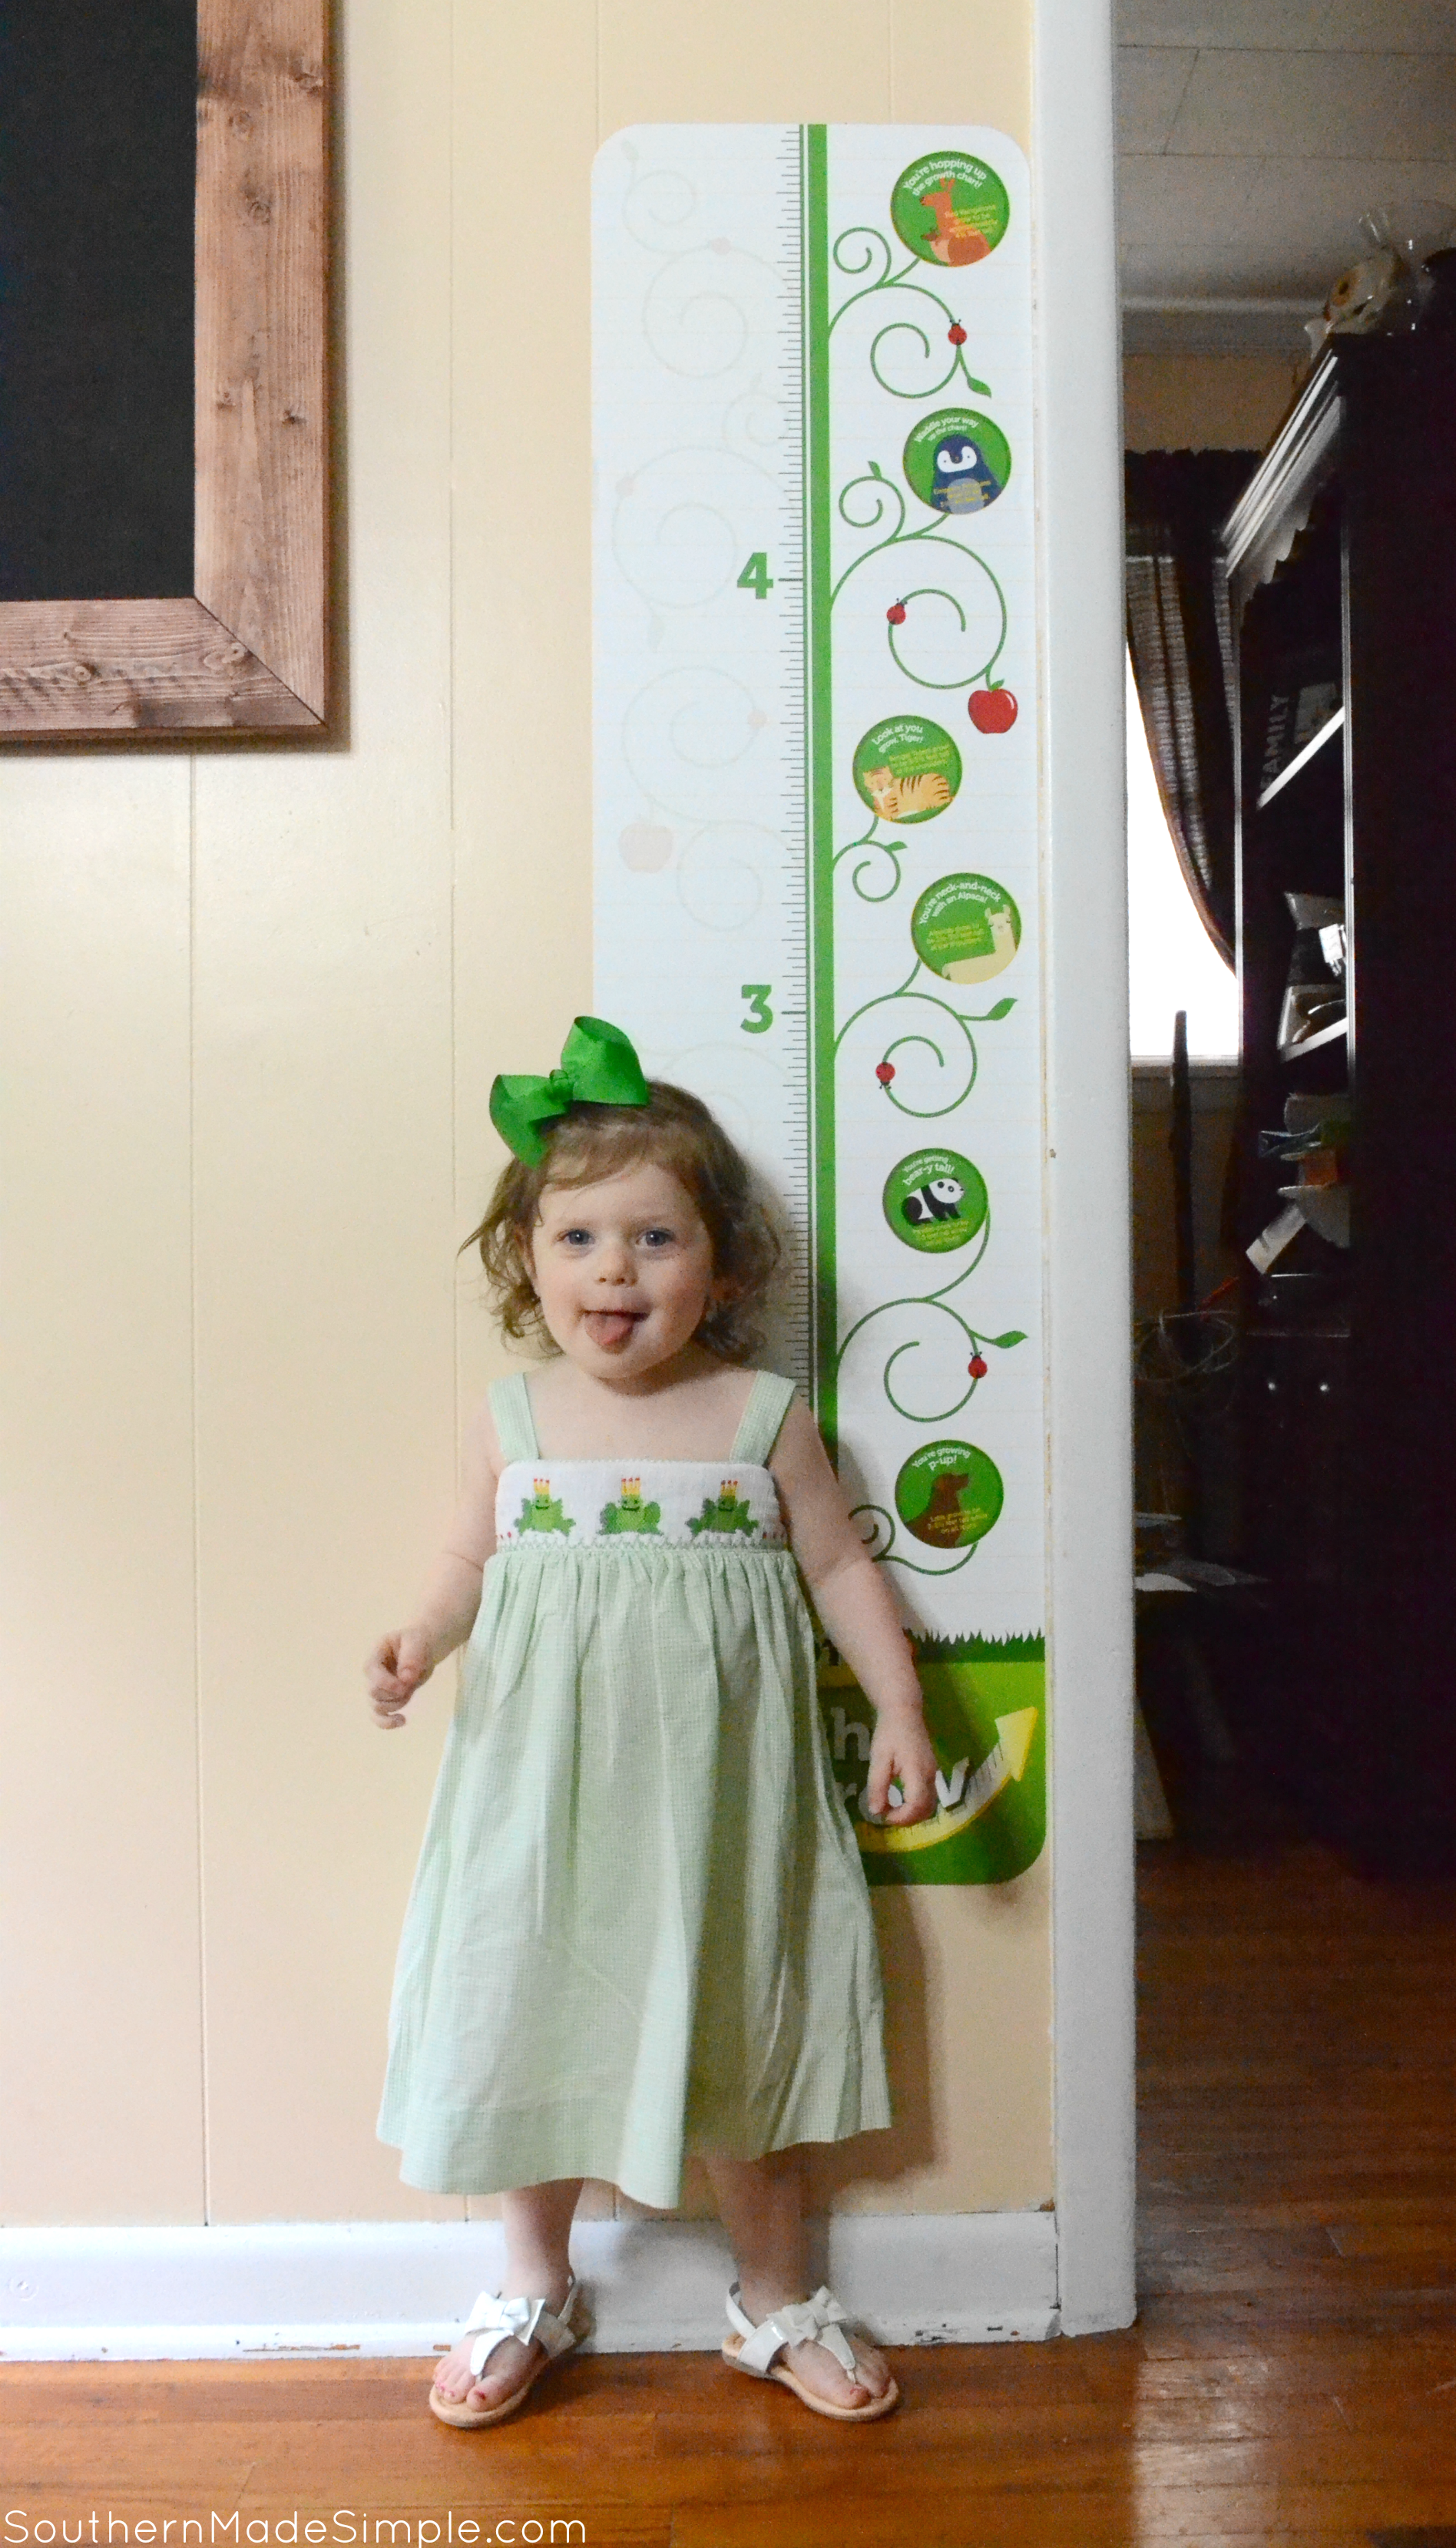 Healthy choices today make for a healthy tomorrow, and Mott's Applesauce and juices are encouraging my daughter to stick to delicious and healthier options so she can grow big and strong! Learn how to snag a free growth chart from Mott's +plus see how we repurposed applesauce cups and used them in our garden! #WatchMeGrow #ad @Motts